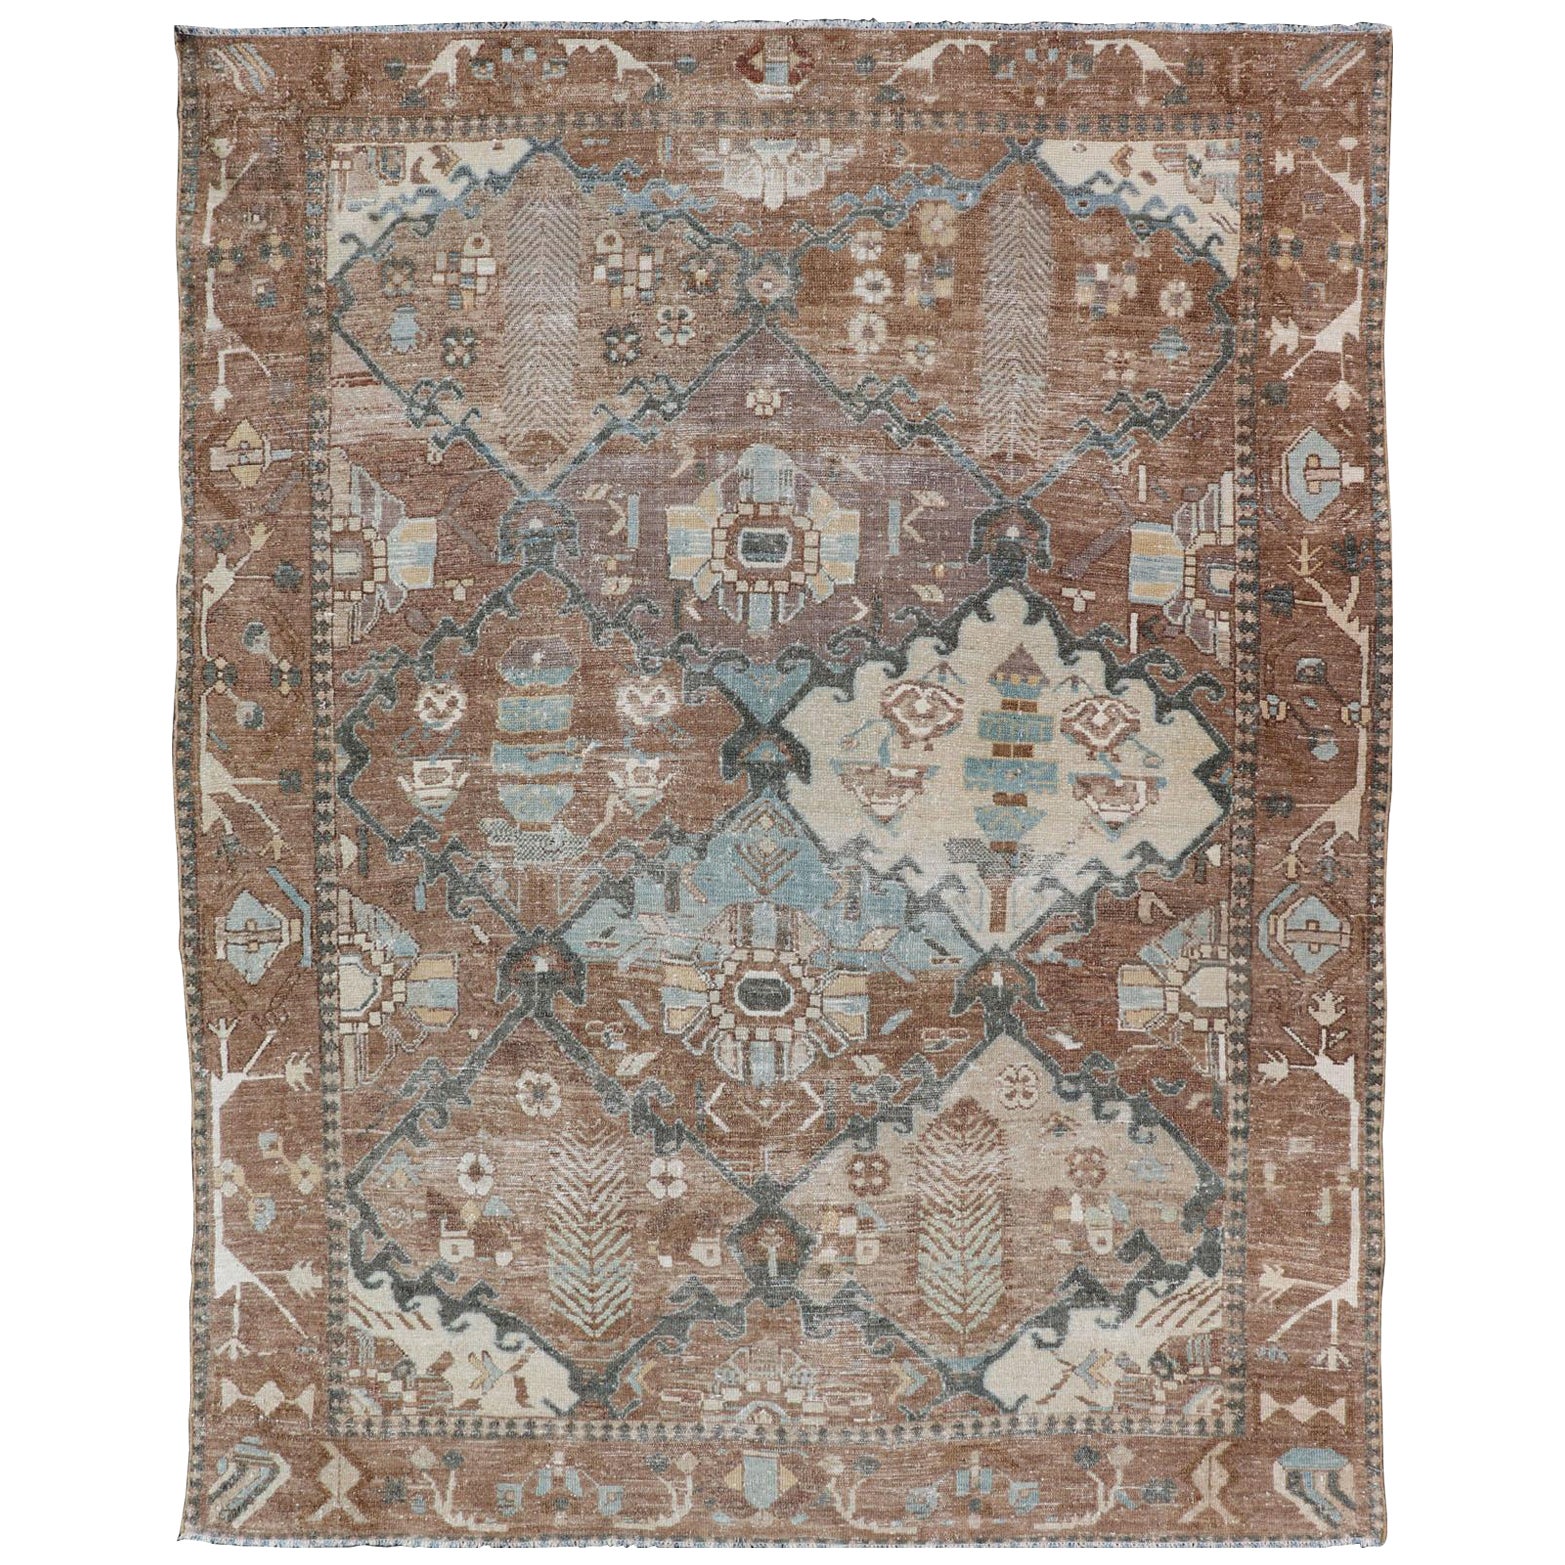 Antique Persian Bakhitari Rug with All-Over Patten in Earthy and Brown Tones